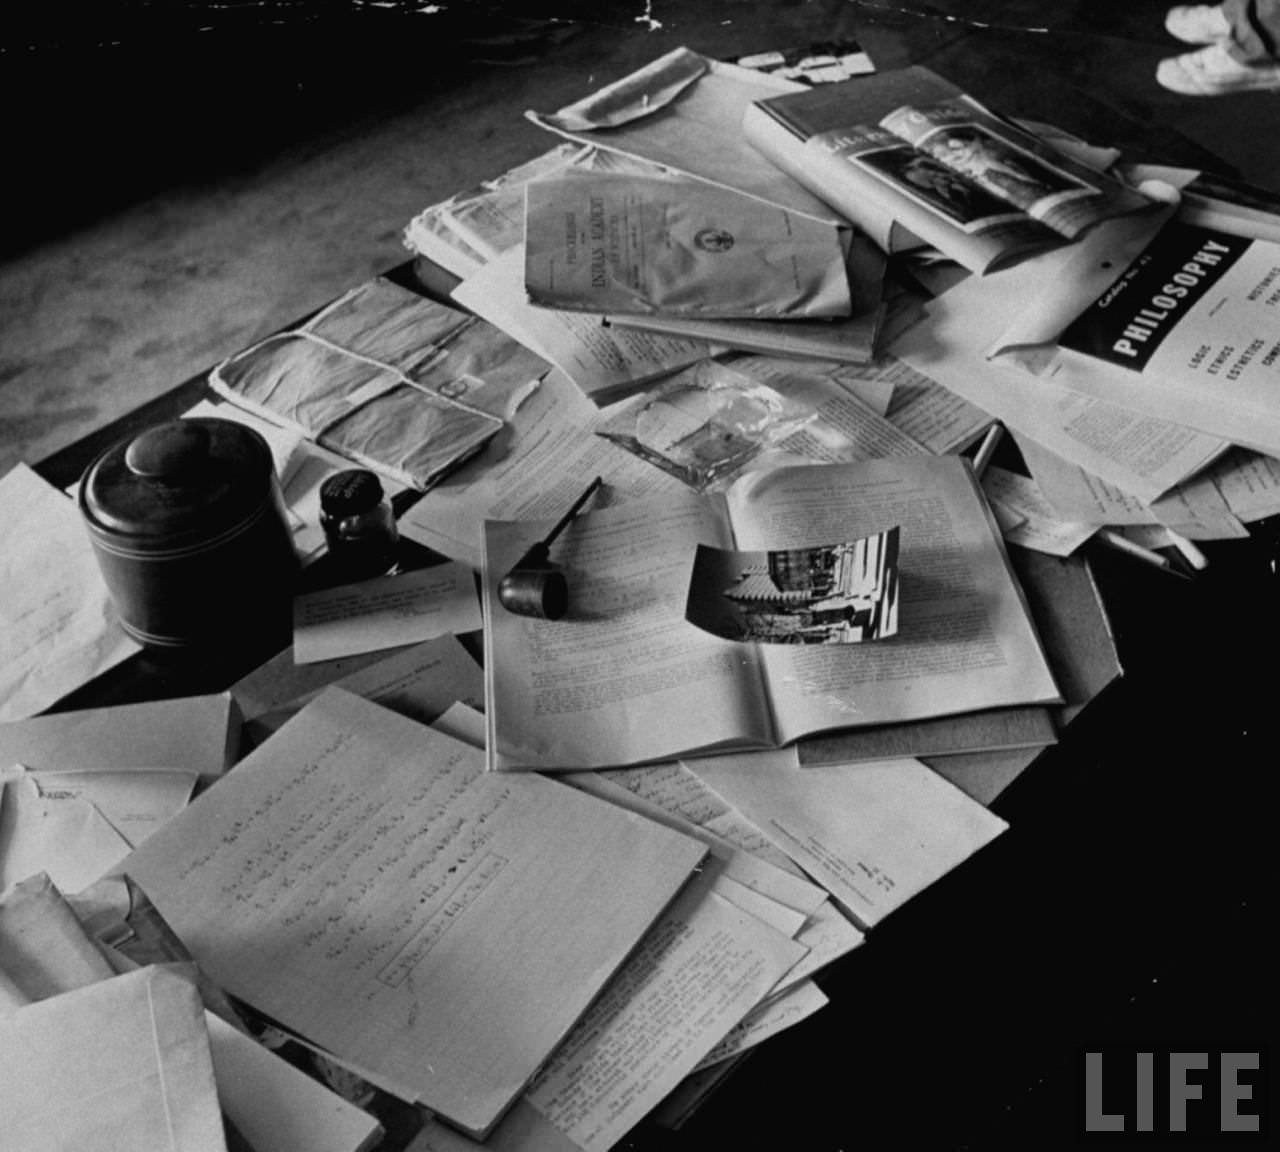 A poignant snapshot of Albert Einstein's personal items and papers, including his pipe and ashtray, captured in his Princeton office on April 18, 1955, after his death.